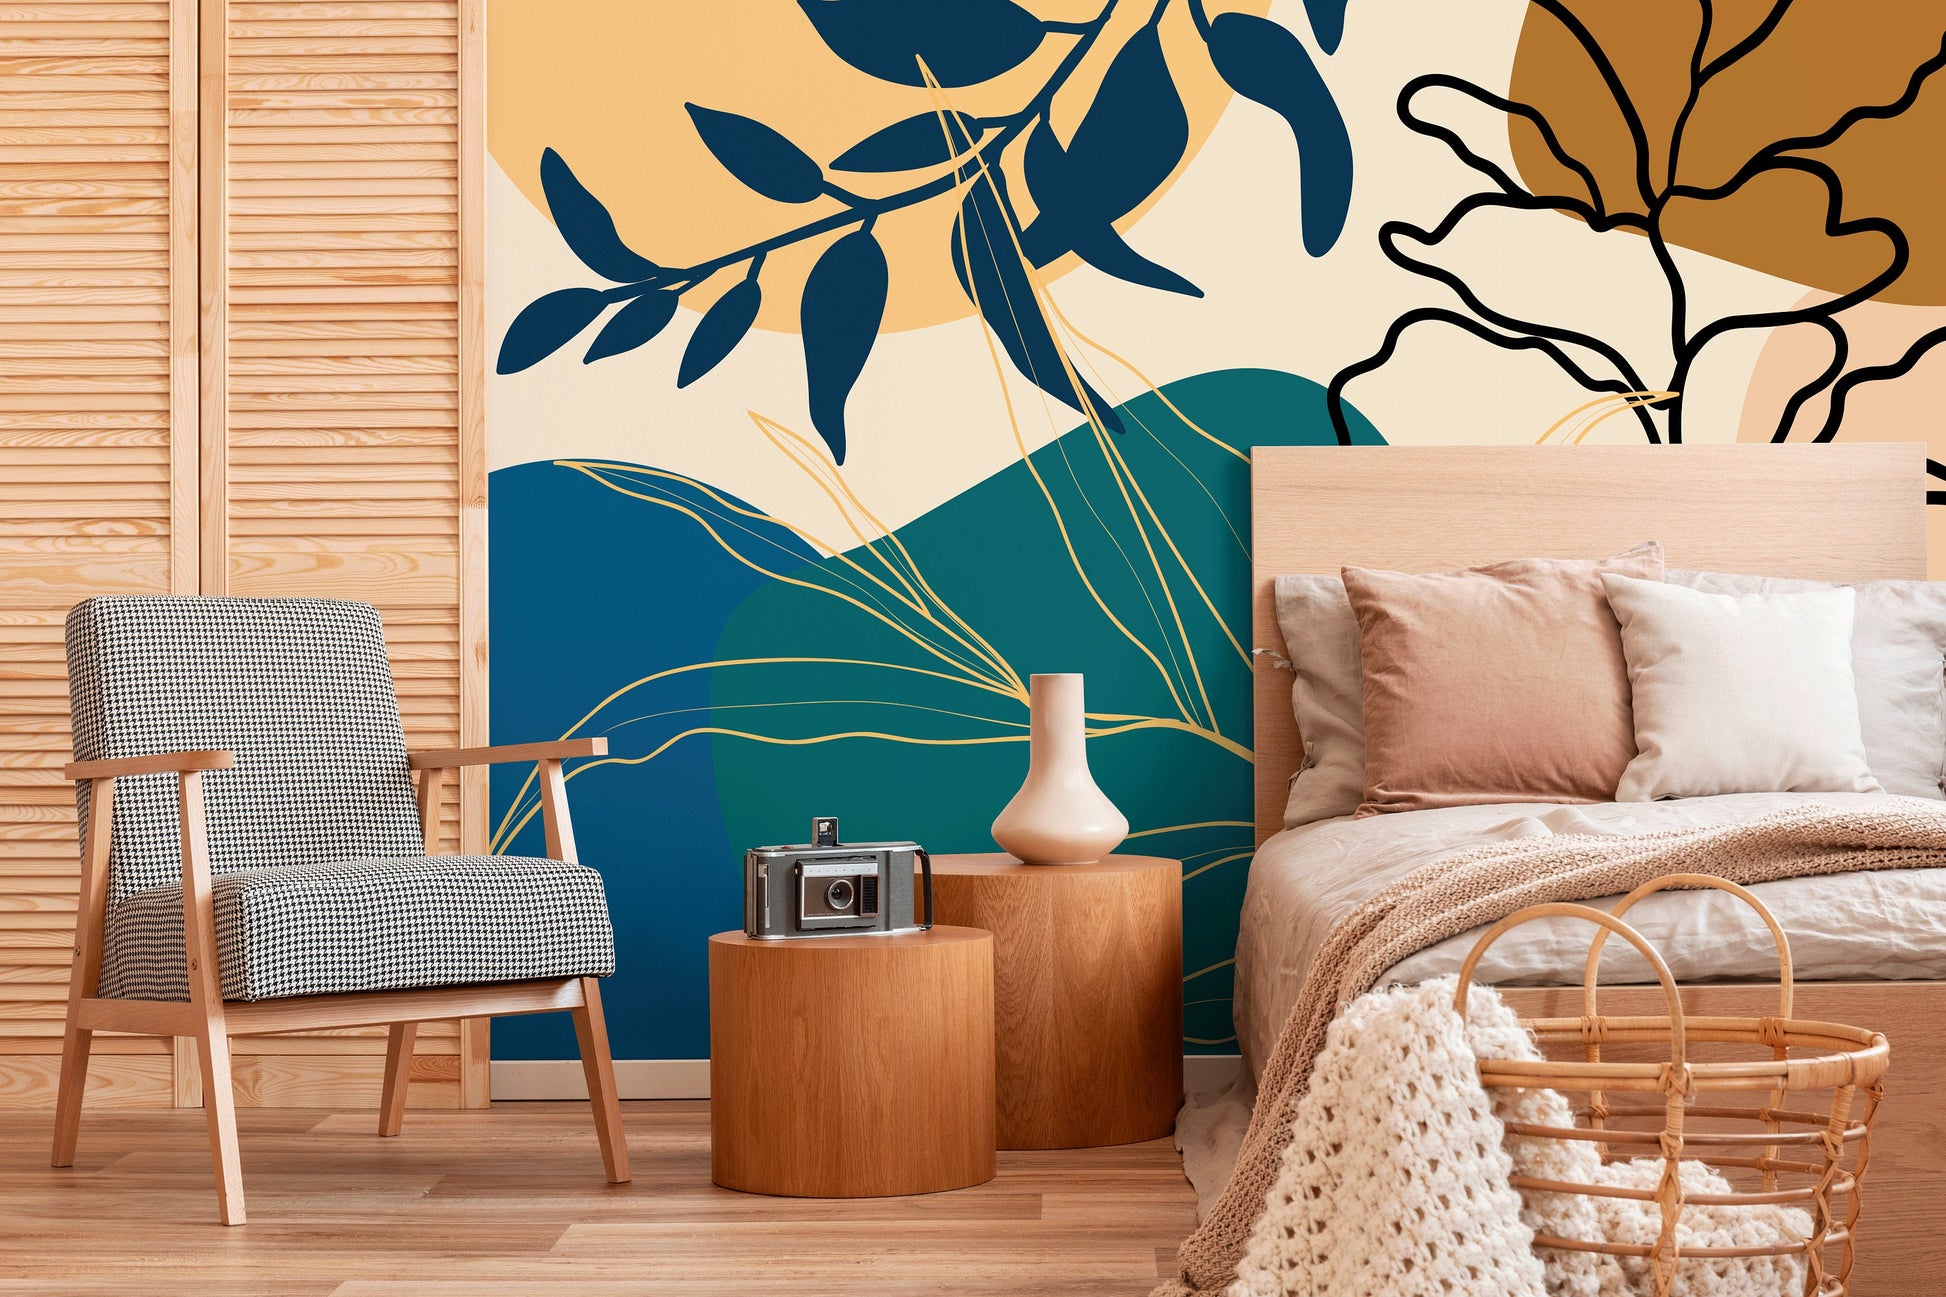 Temporary Leaves Mural Removable Wallpaper Wall Decor Home Decor Wall Art Printable Wall Art Room Decor Wall Prints Wall Hanging - B951